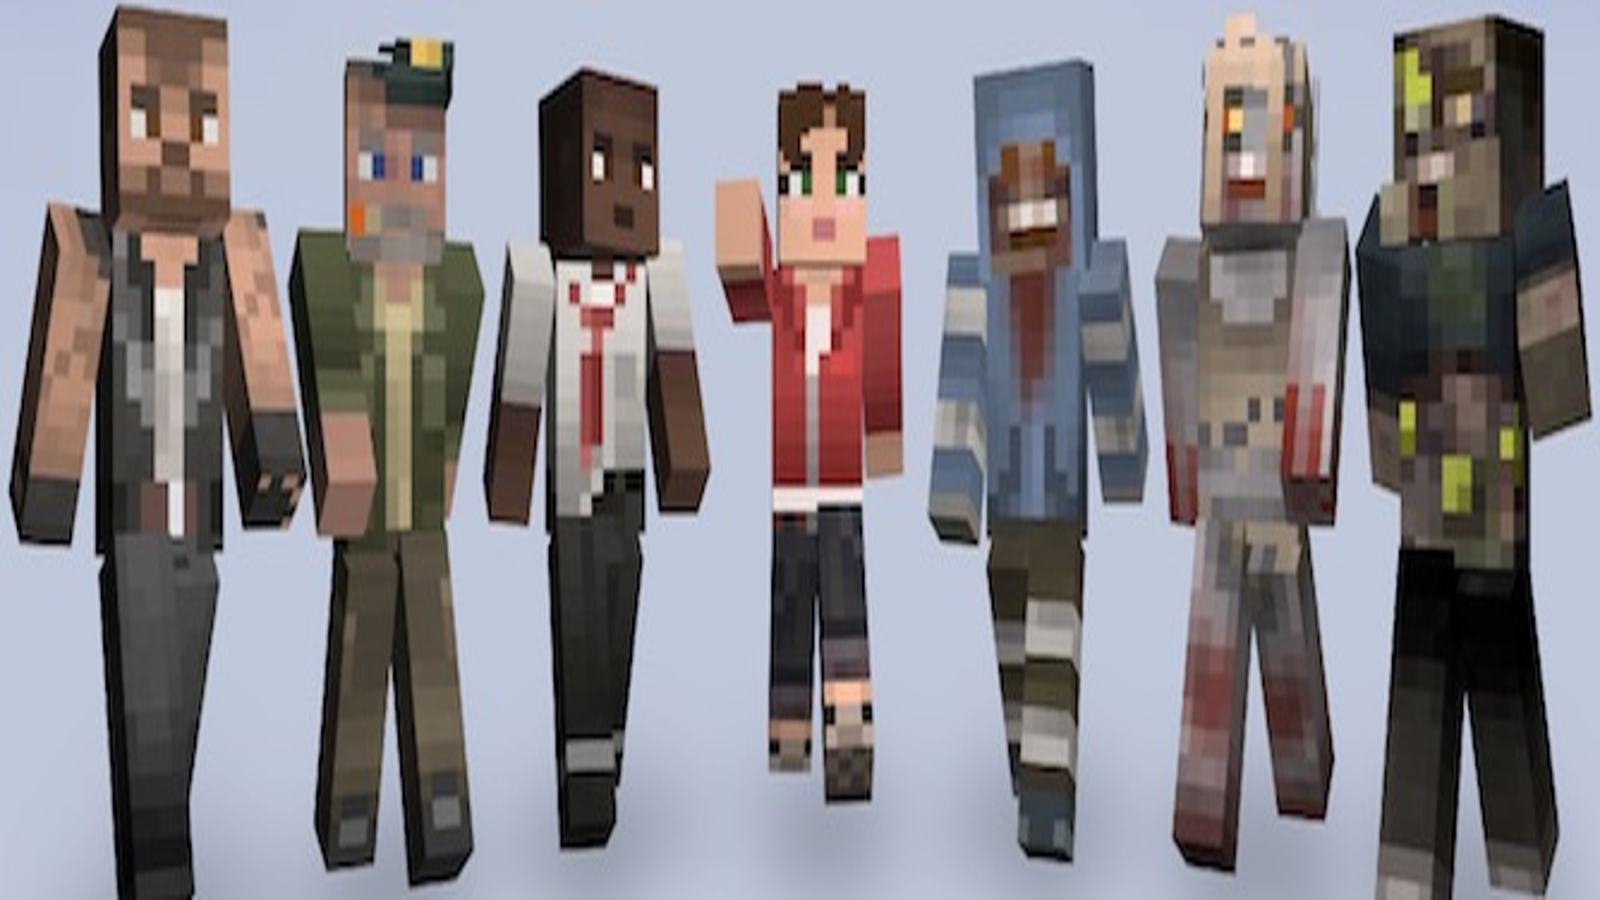 Discussion - All Minecraft Xbox 360 Skins